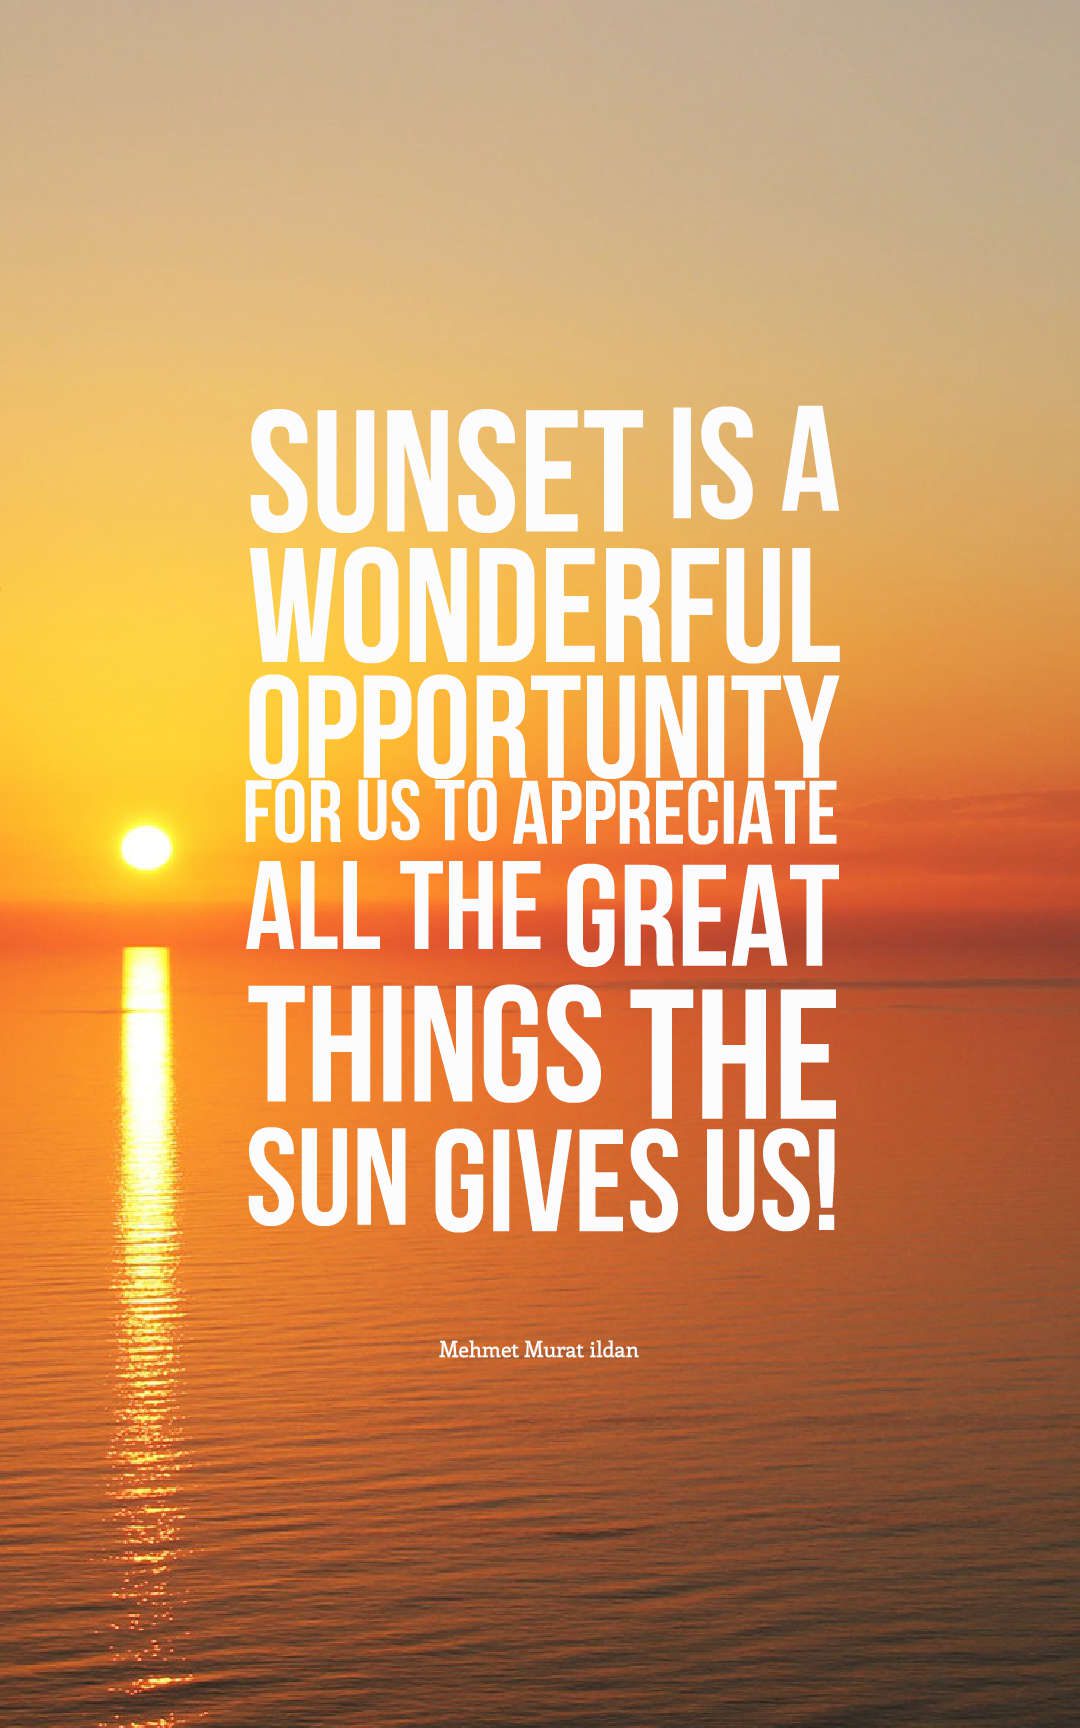 Sunset is a wonderful opportunity for us to appreciate all the great things the sun gives us!